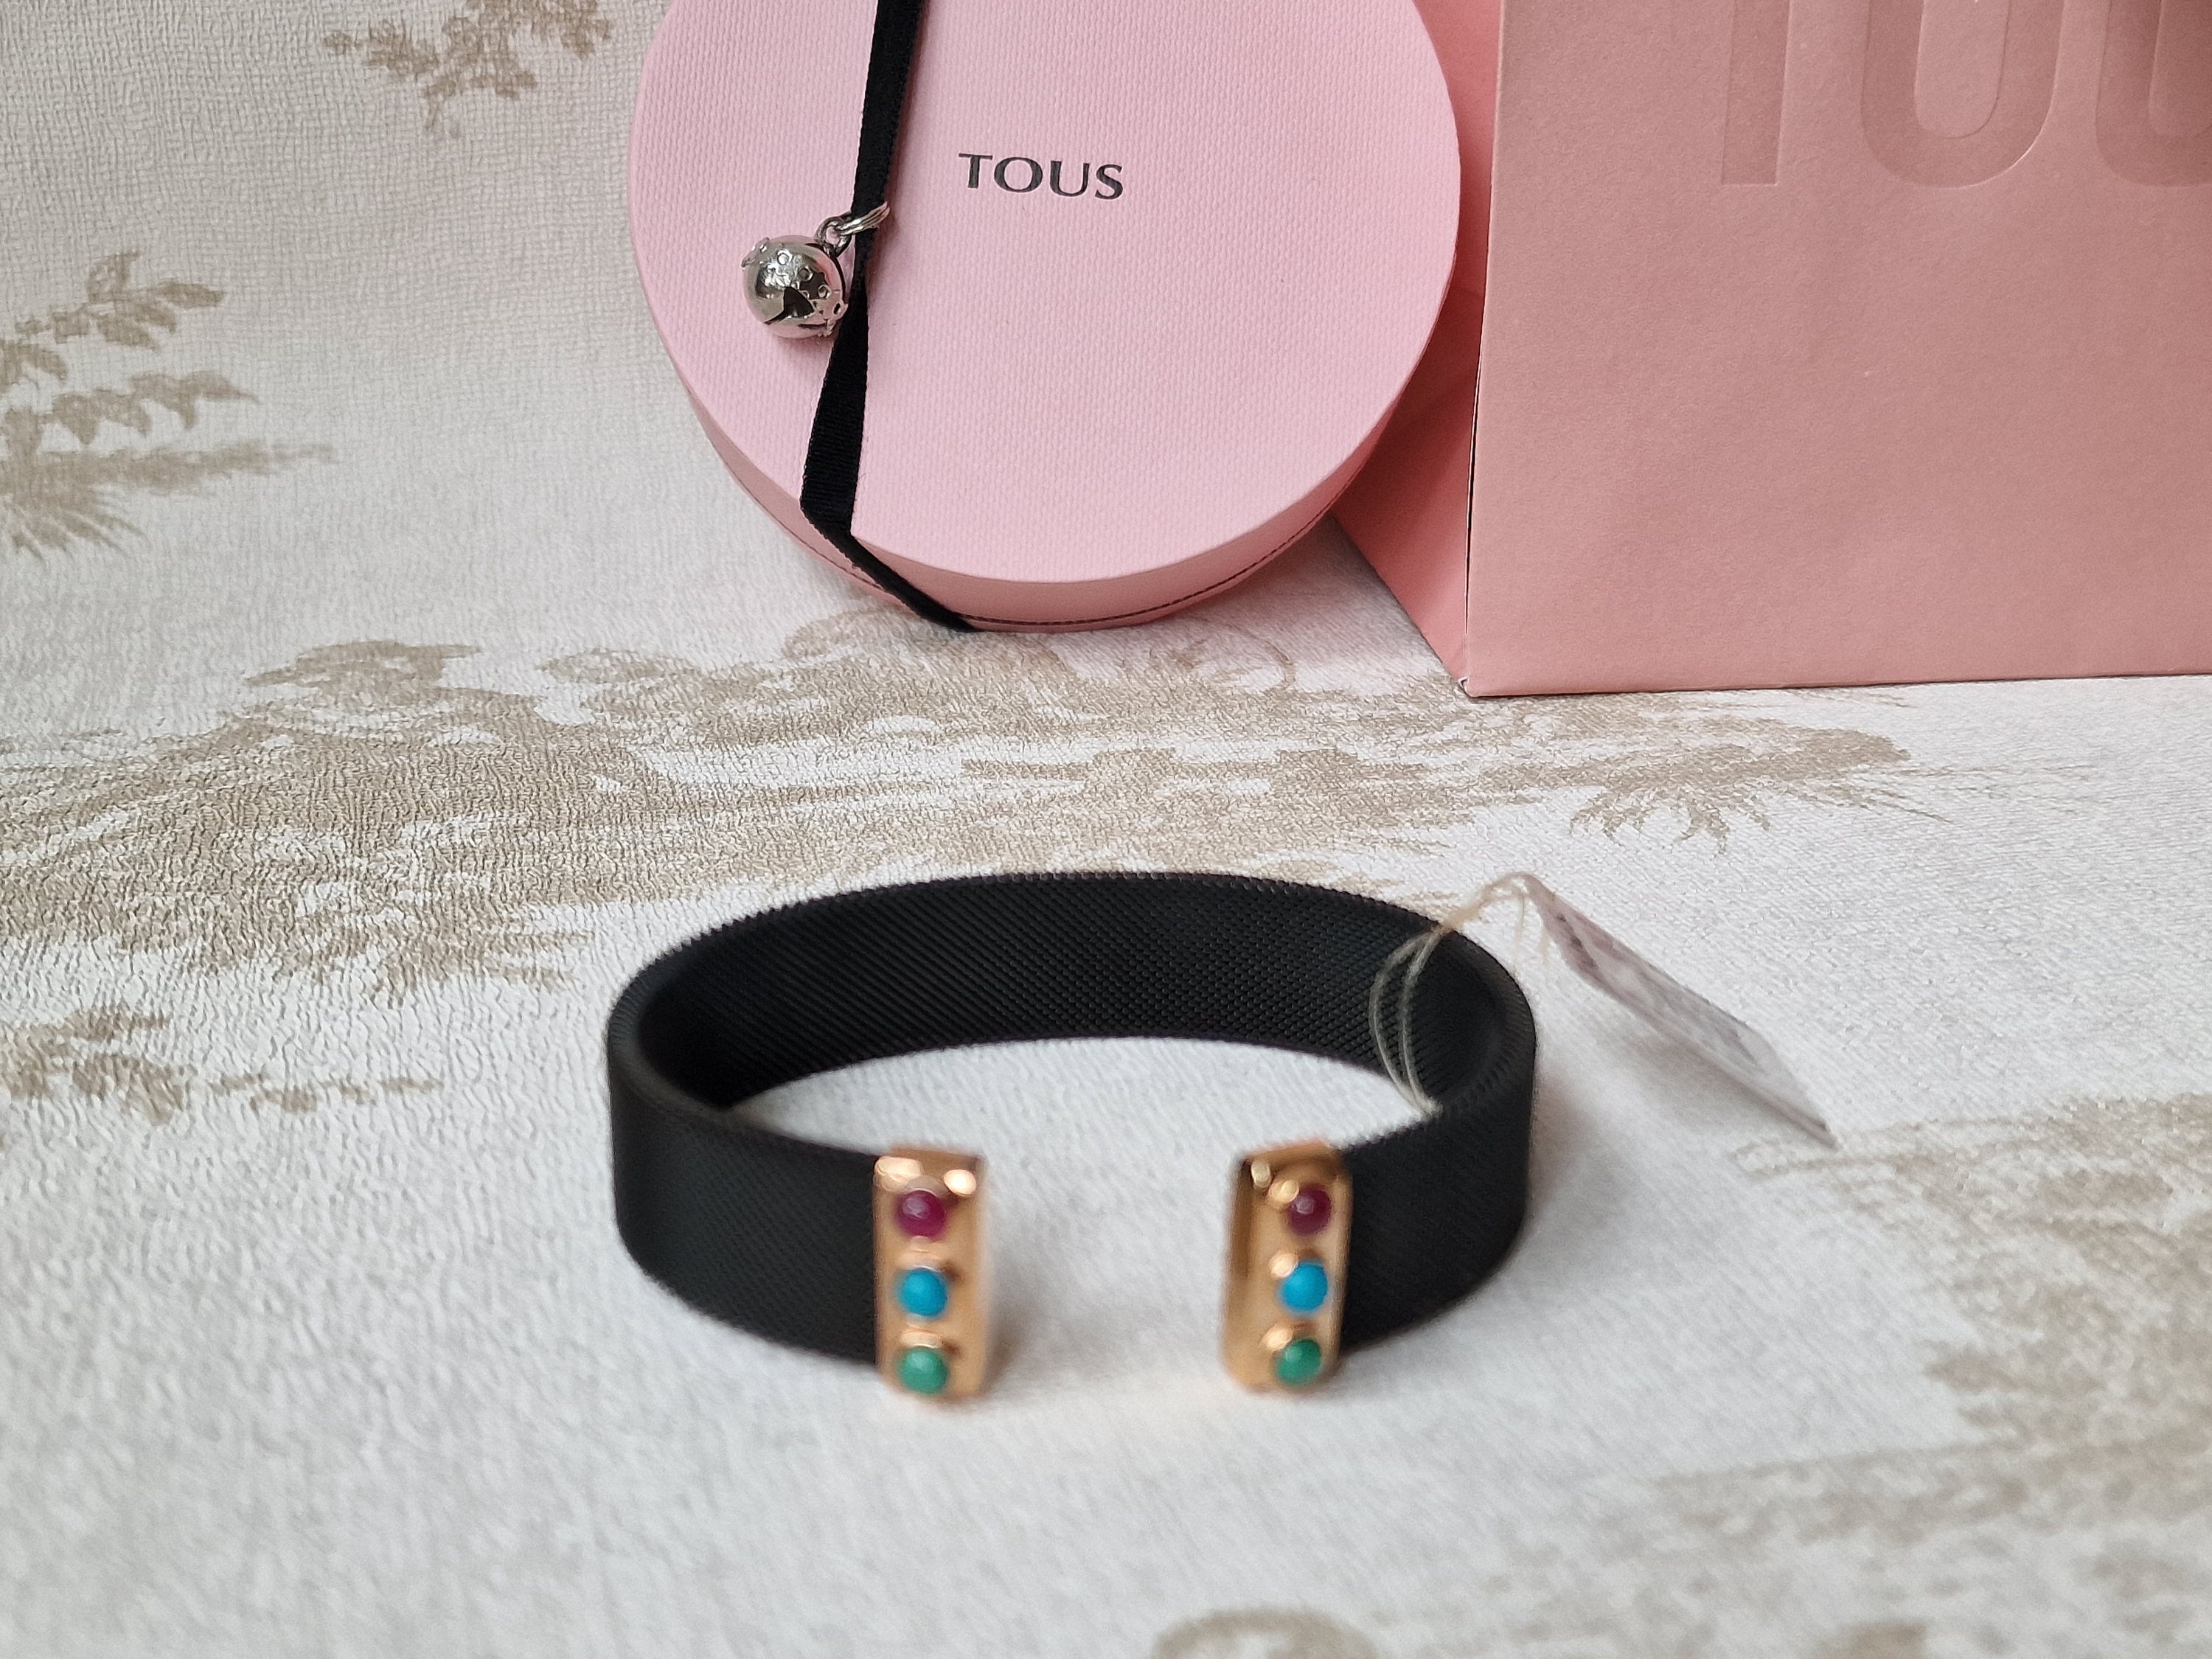 TOUS SUPERPOWER Bracelet 925/1000 Silver 18kt Gold Plated Retired Designer,  Complete With Box and Bag, Tag, Turquoois, Ruby, Malachite - Etsy